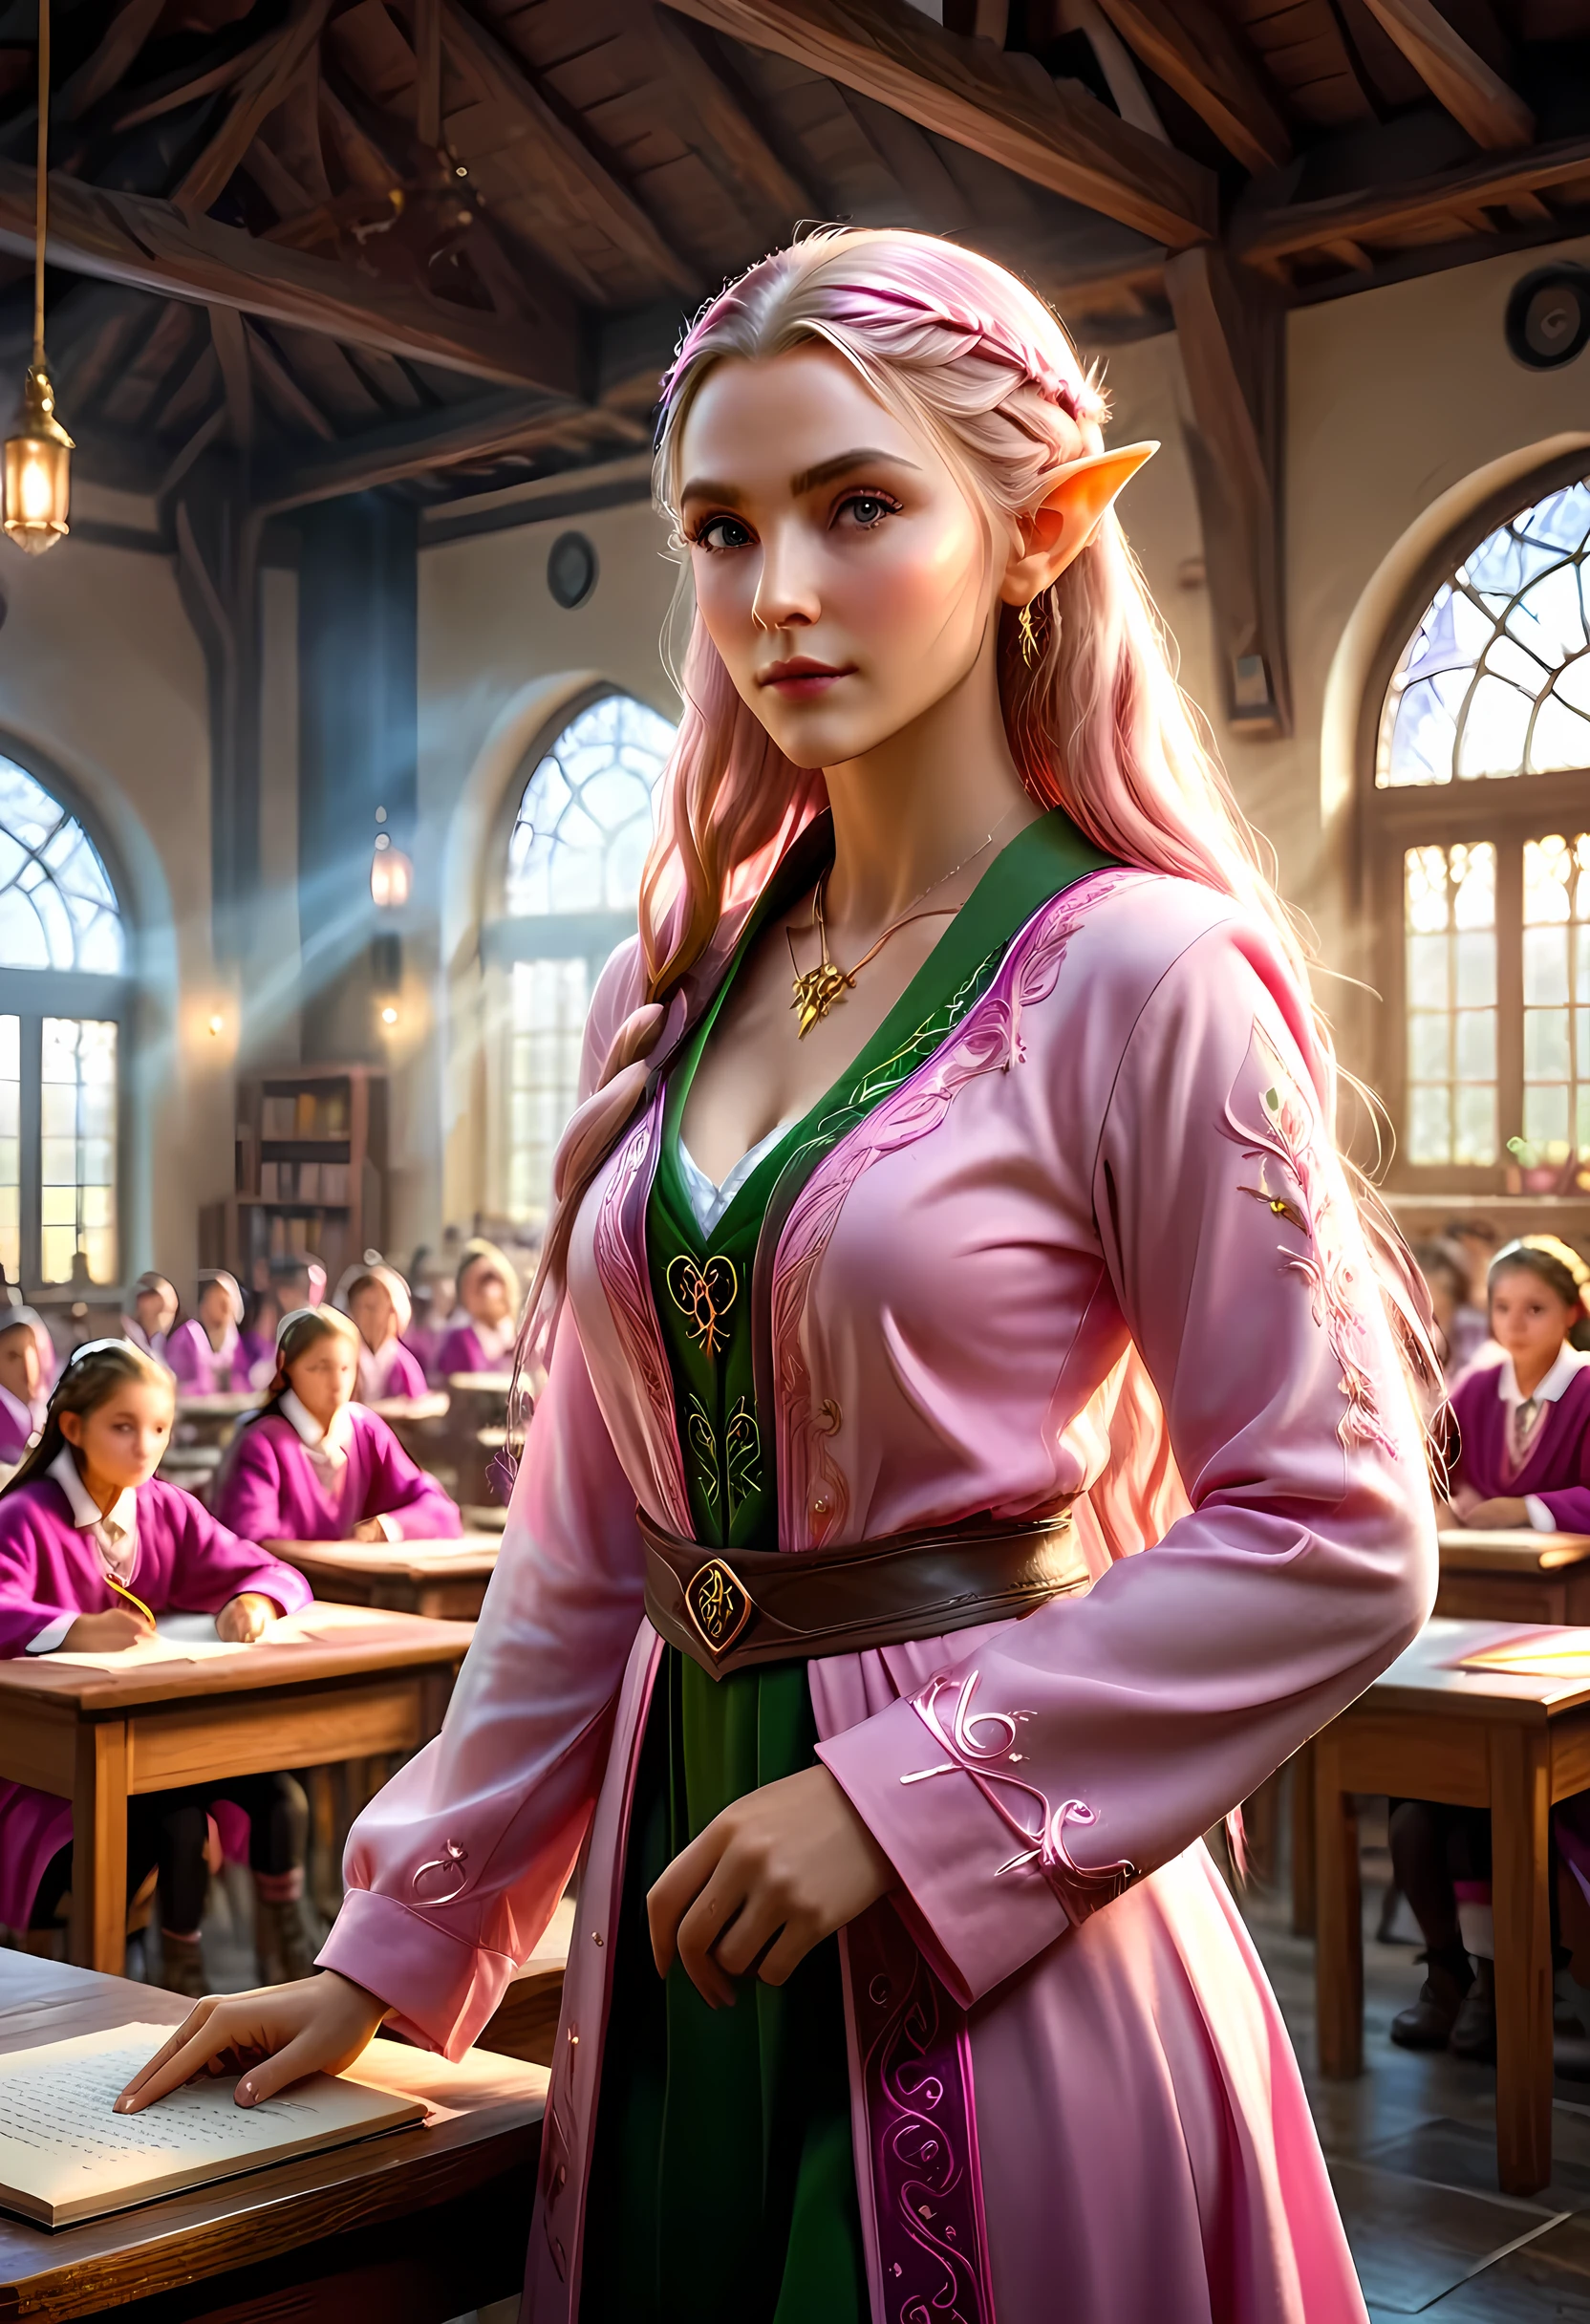 high details, best quality, 16k, [ultra detailed], masterpiece, best quality, (extremely detailed), ultra wide shot, photorealistic, a picture of an elf magical teacher (best details, Masterpiece, best quality: 1.5), teaching magical arts, manipulating magical pink magic runes in the air GlowingRunes_pink (best details, Masterpiece, best quality: 1.5) at fantasy classroom, a female elf, exquisite beauty (best details, Masterpiece, best quality: 1.5), ultra feminine (best details, Masterpiece, best quality: 1.5), full body (best details, Masterpiece, best quality: 1.5) golden hair, hair in a long braid, small pointed ears, dynamic eyes color, wearing a teachers robe, standing in the classroom (best details, Masterpiece, best quality: 1.5), fantasy class background, best realistic, best details, best quality, 16k, [ultra detailed], masterpiece, best quality, (extremely detailed), ultra wide shot, photorealism, room is lit with bright light, depth of field, half-elf ears, ArmoredDress